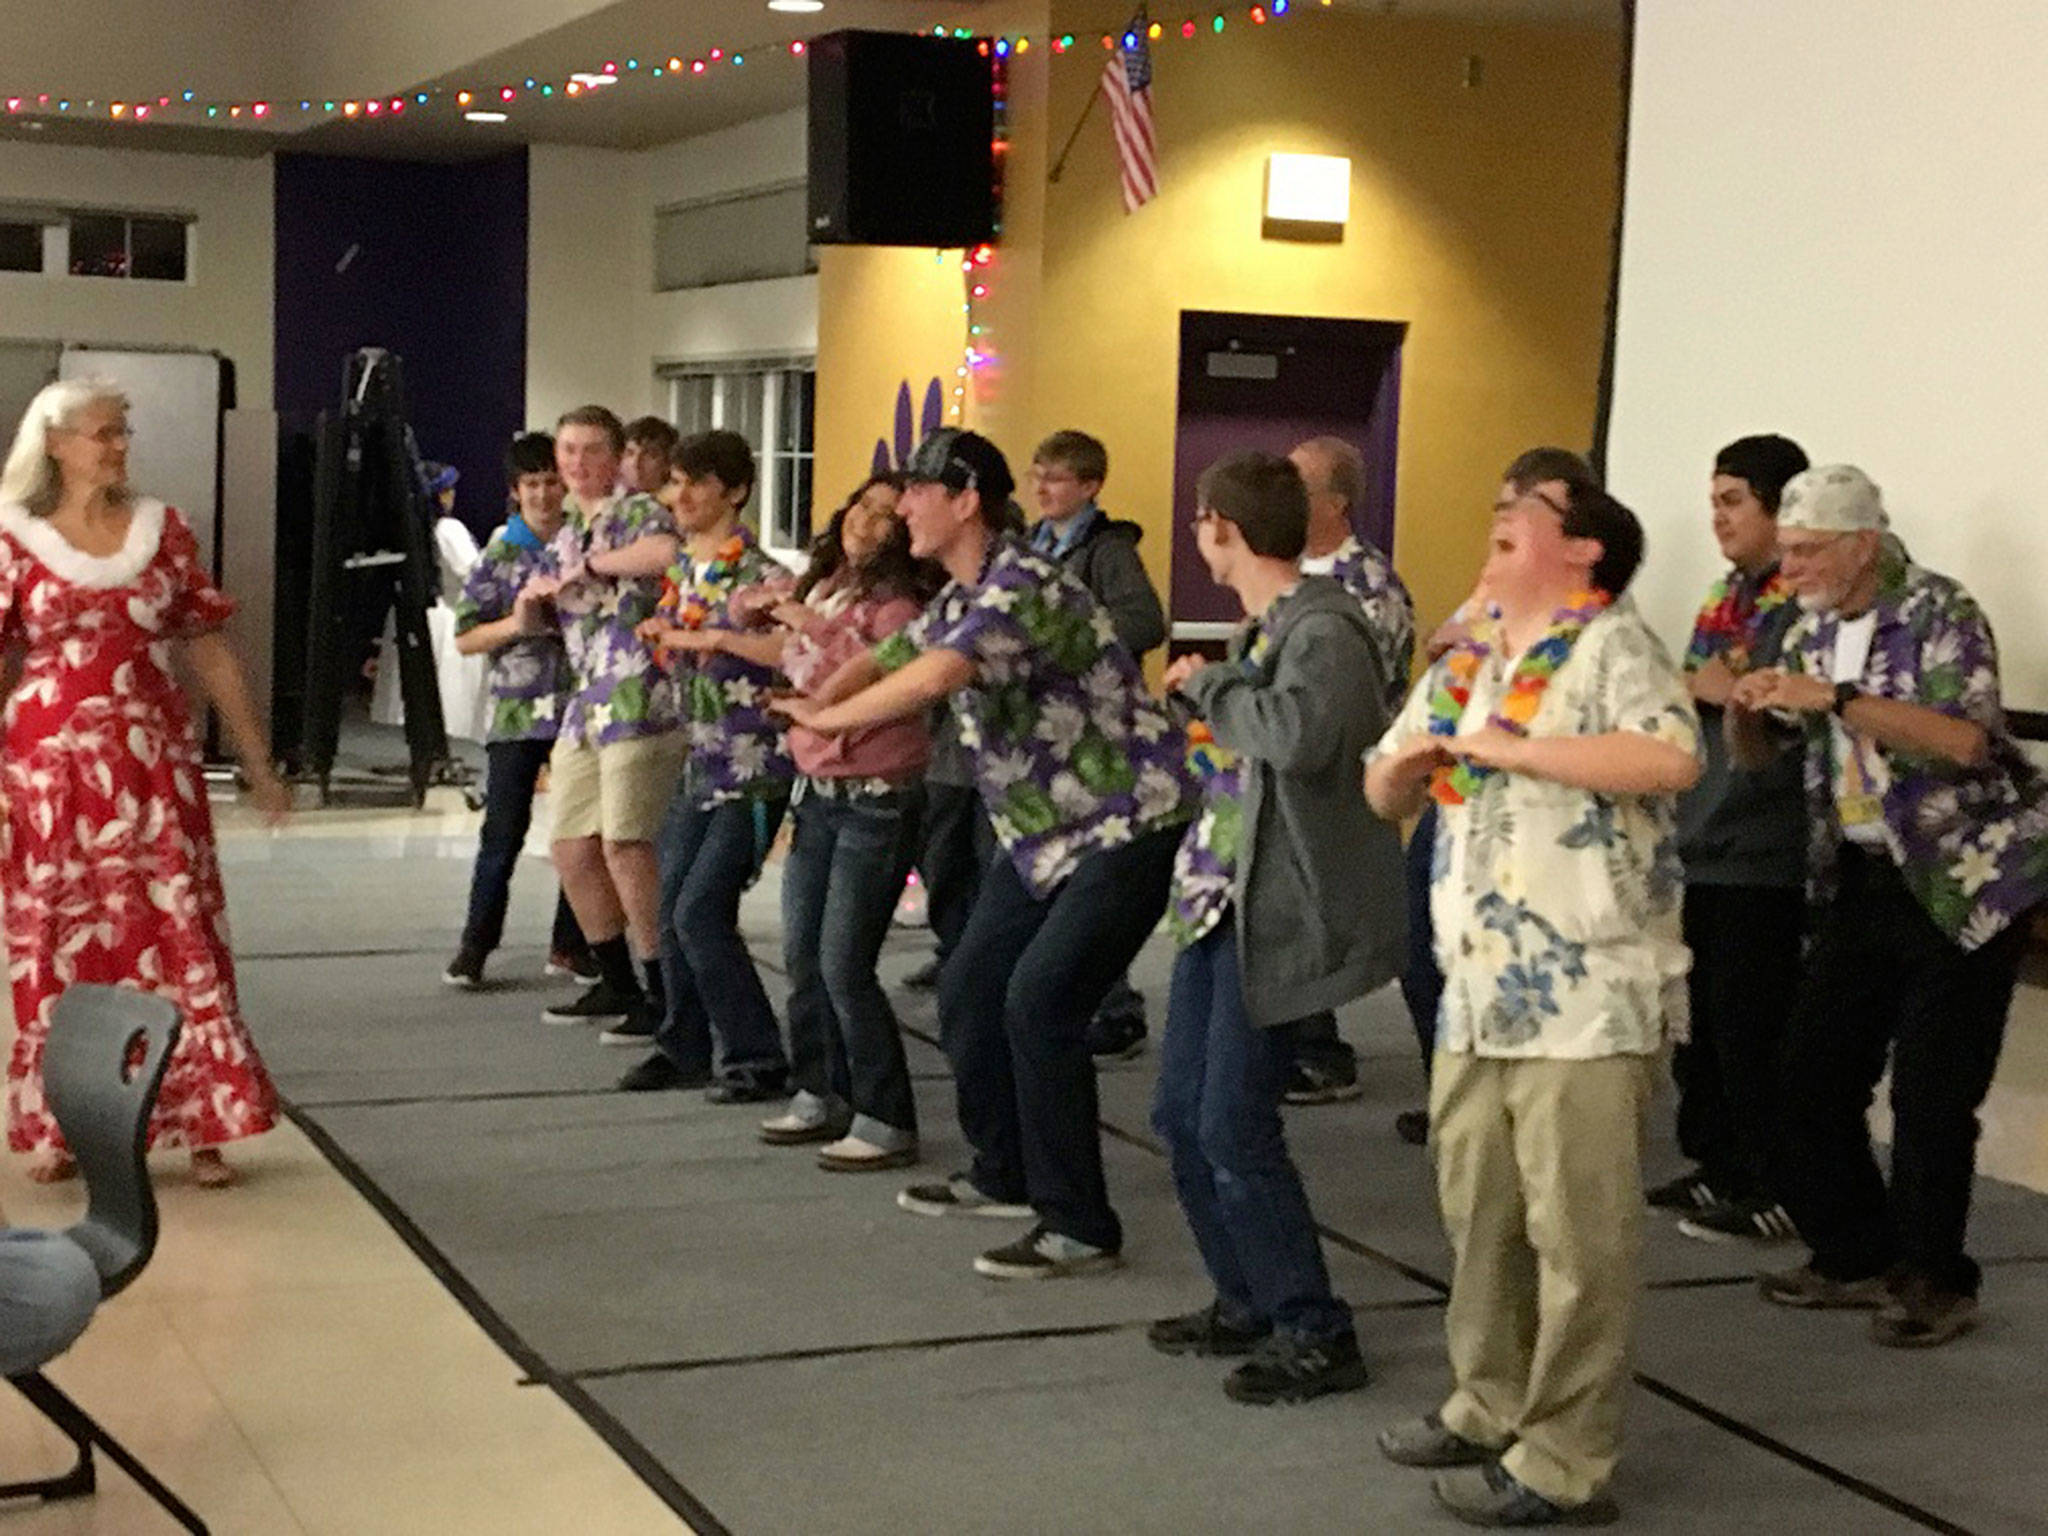 Team members of the Sequim High School Robotics Club, also known as the Sequim Robotics Federation, attempt to hula at last year’s luau for the team. The annual event, this year on Dec. 1, serves as its biggest fundraiser for competitions. Submitted photo